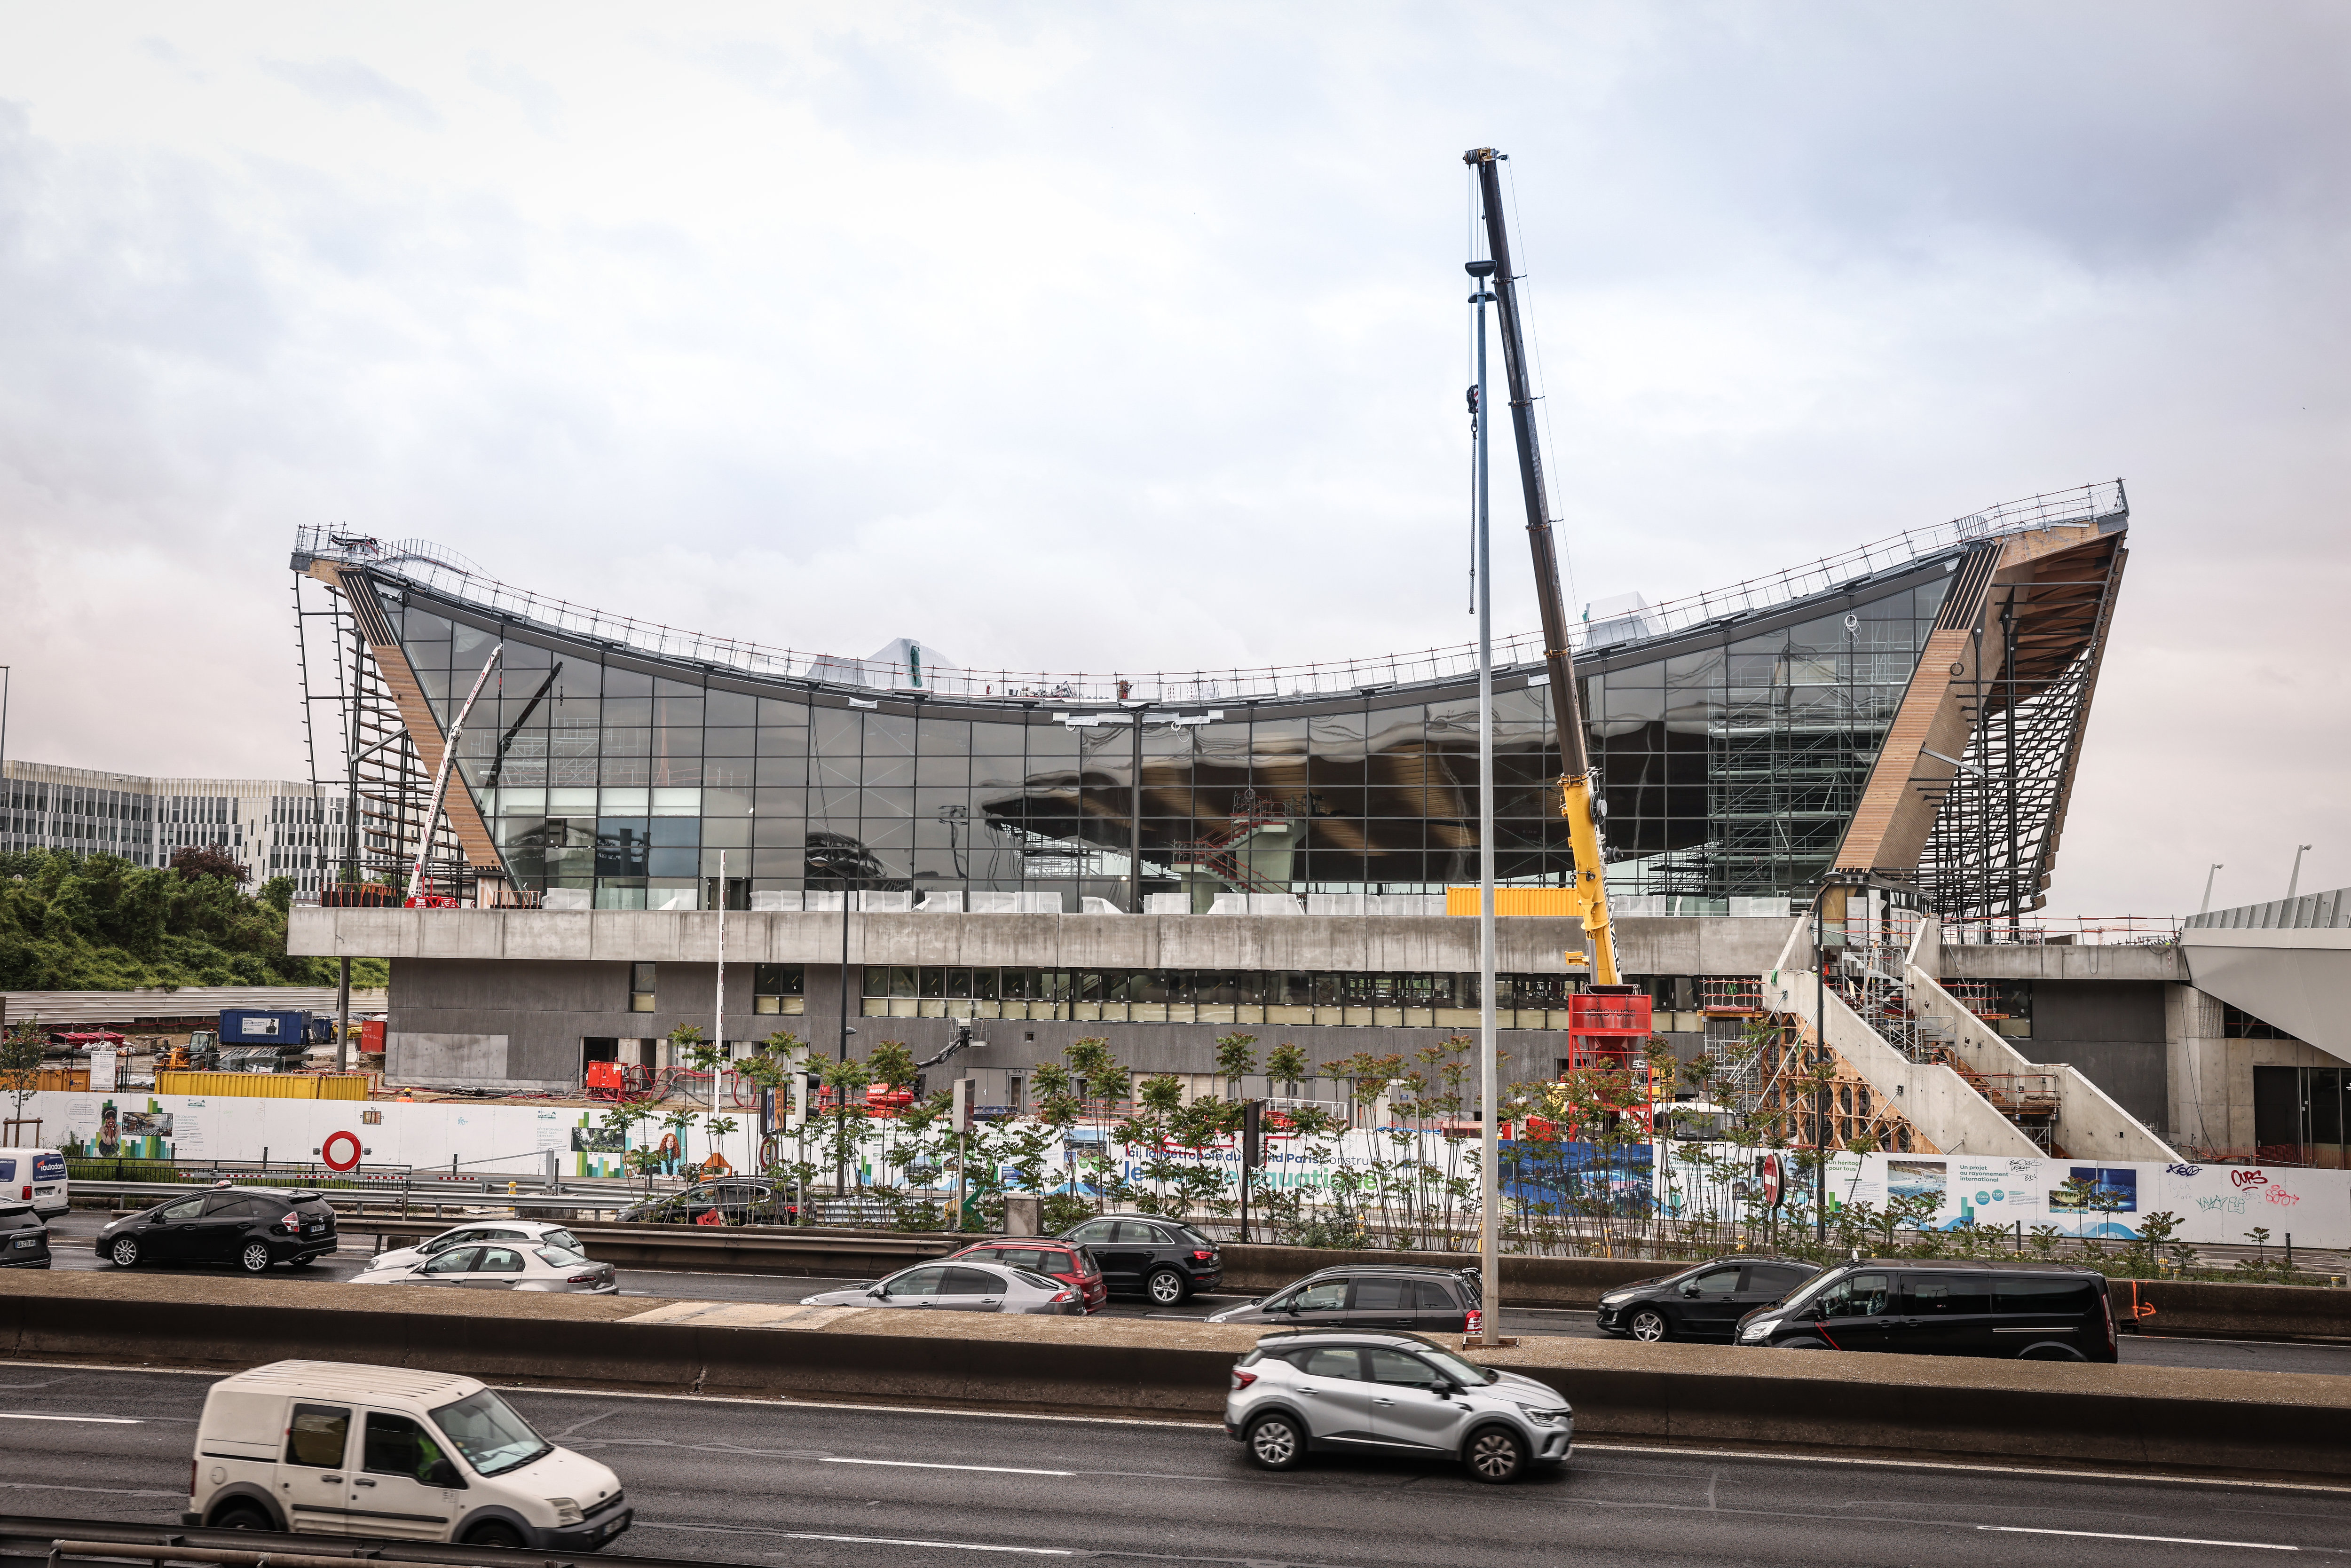 The Saint-Denis Olympic Aquatic Center (Seine-Saint-Denis) will be delivered in March 2024. Credits: Le Parisien/Fred Dugit